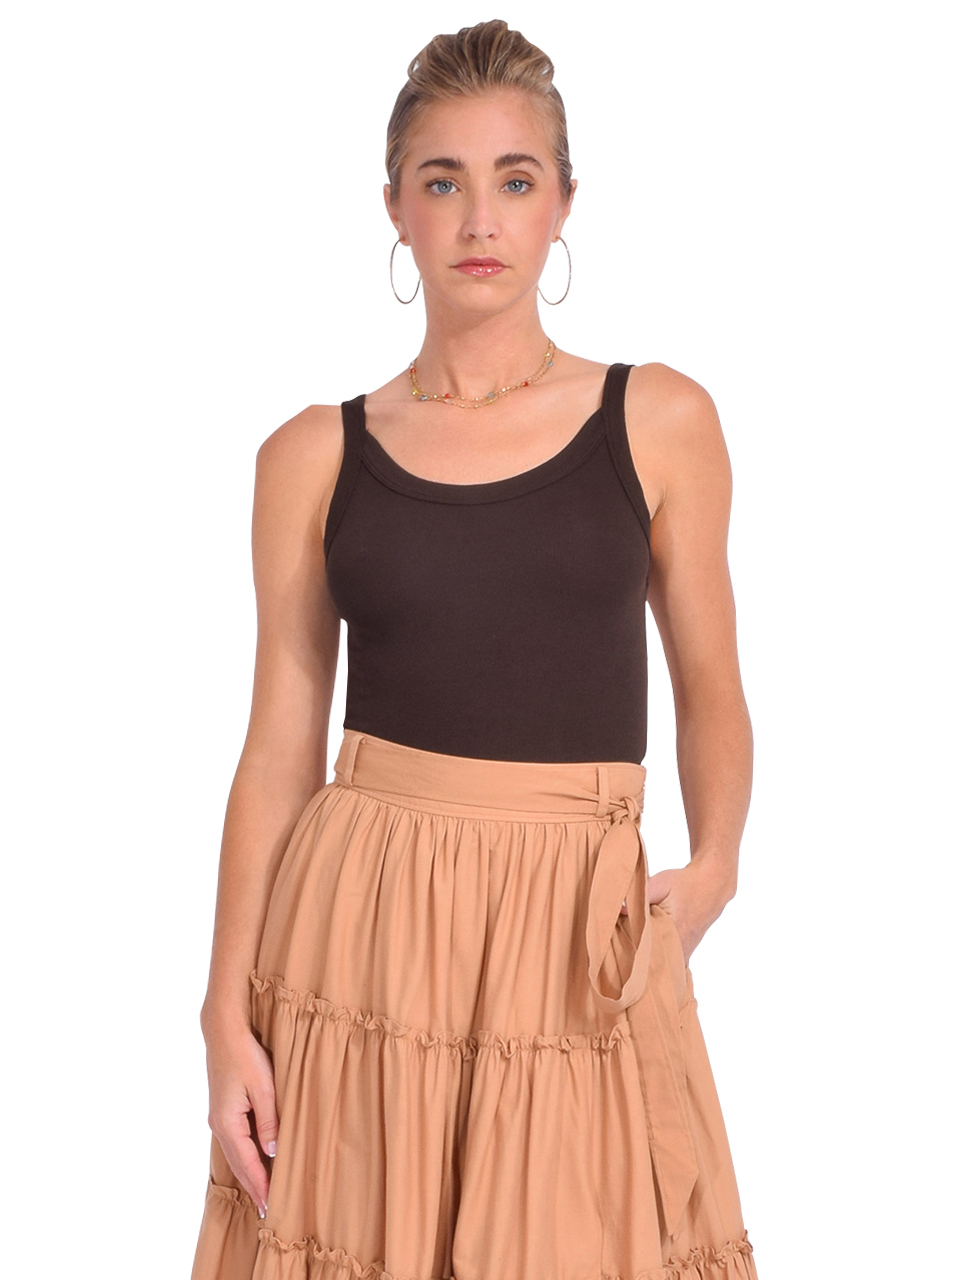 Cotton Citizen Verona Tank in Expresso Front View 